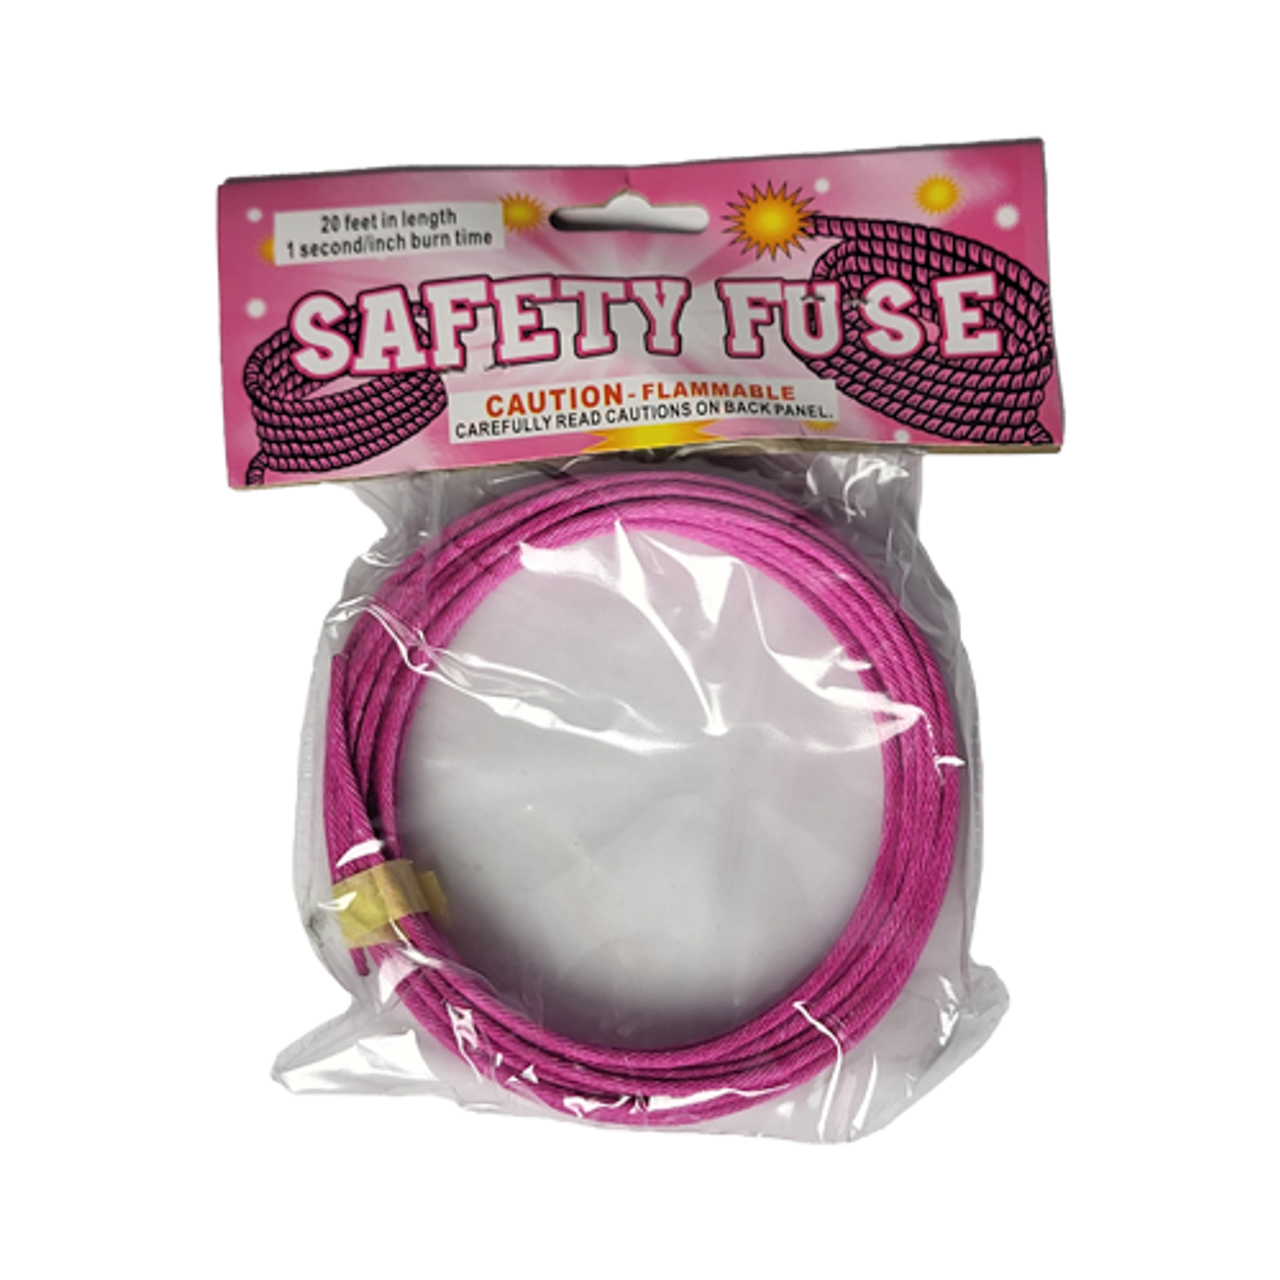 PINK SAFETY LINK - 1 SEC / INCH (20 FEET)